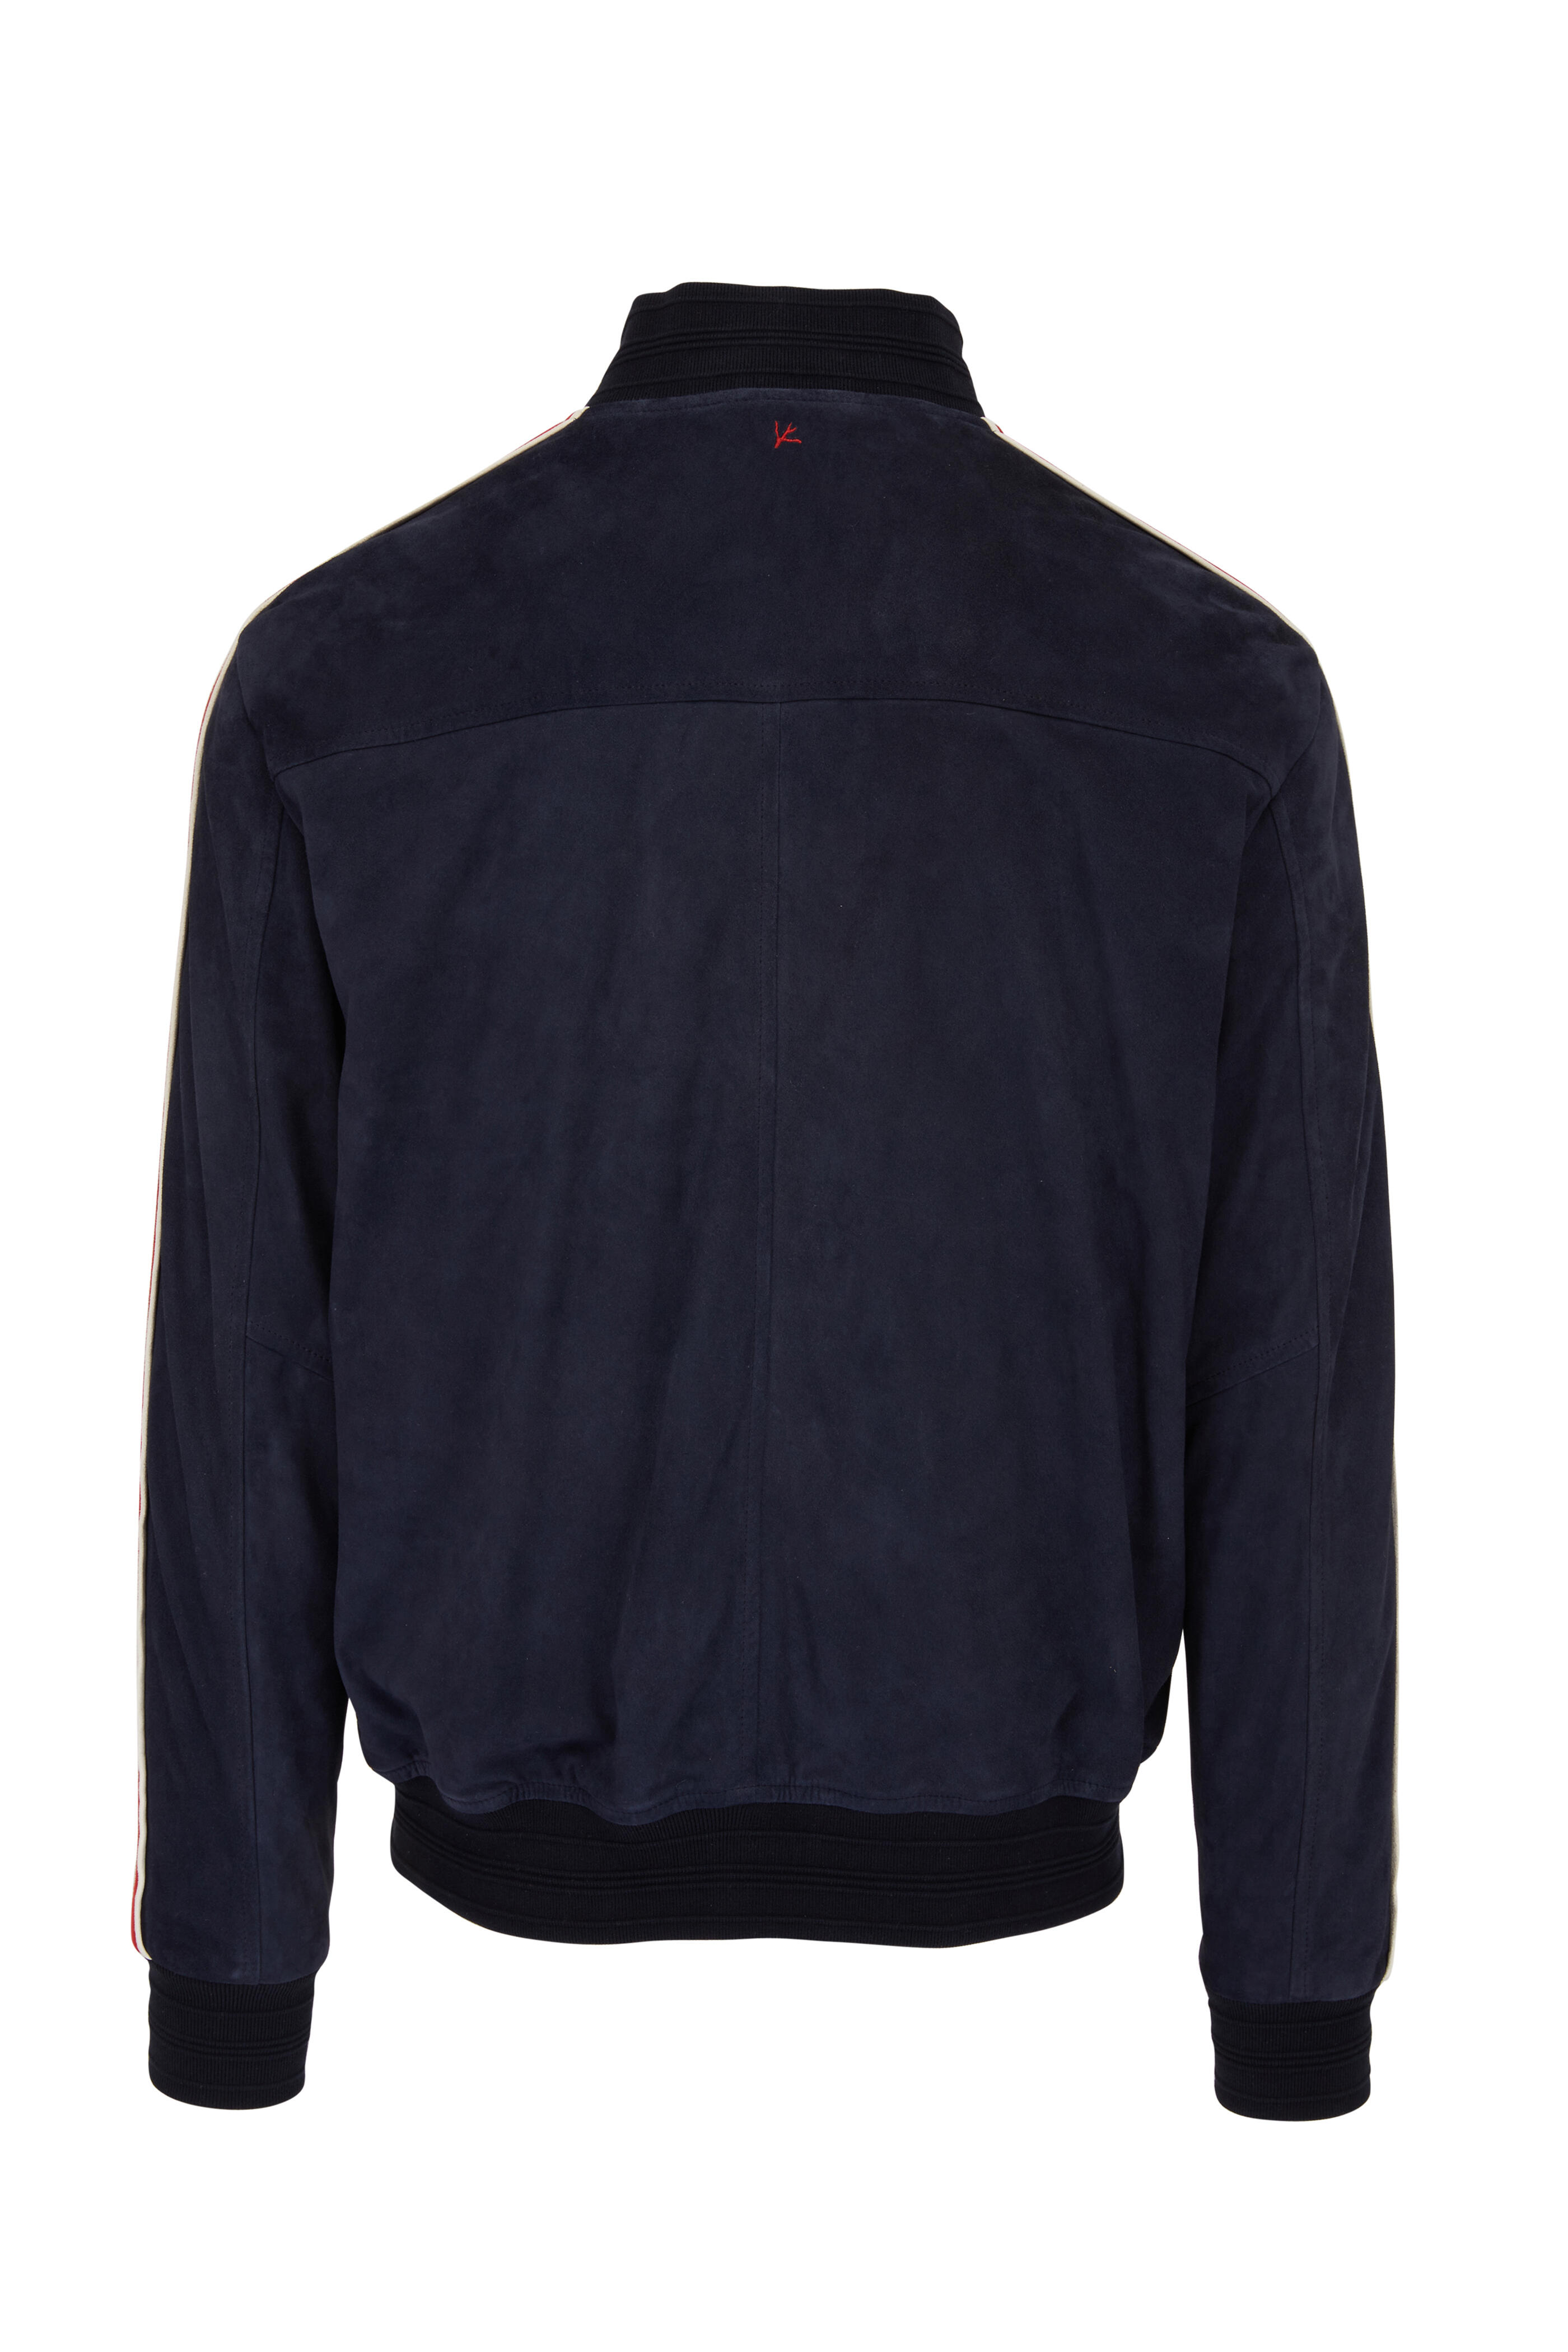 Isaia - Navy & Red Stripe Suede Bomber Jacket | Mitchell Stores